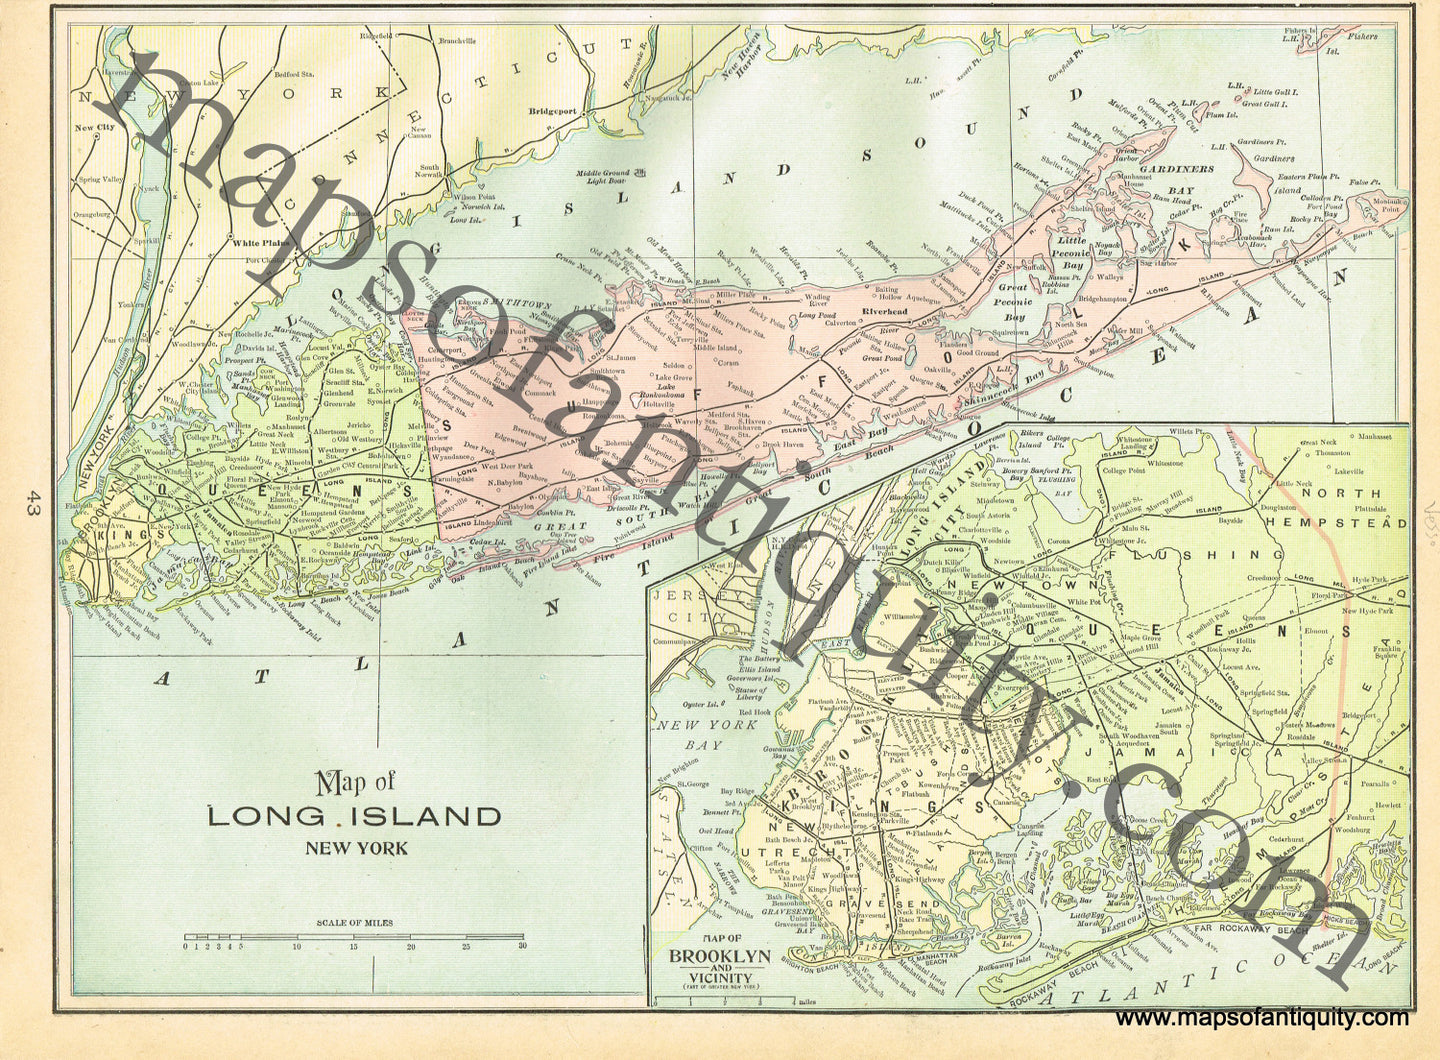 1900 - Map of Long Island New York and Brooklyn, New York, verso: New York State, and Maryland and Delaware - Antique Map